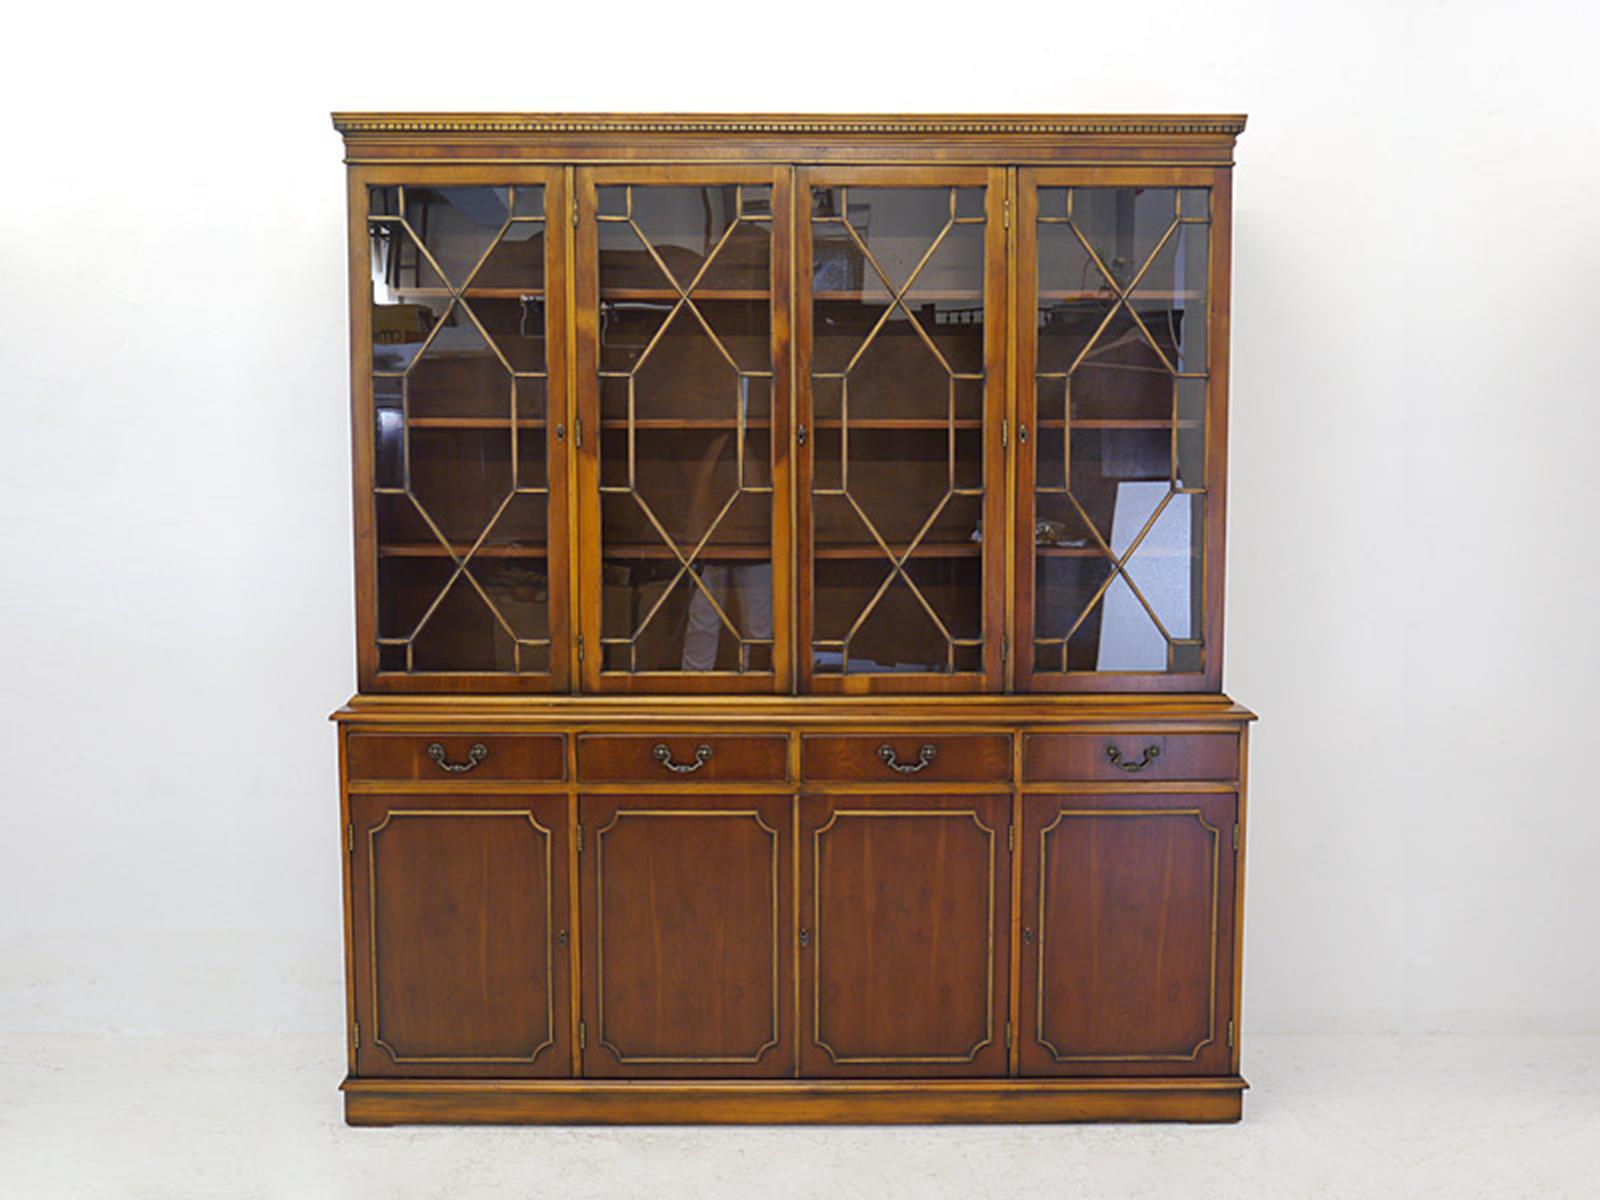 Stylish four-door display cabinet in English style made of walnut veneer.
The four glass doors are provided with rungs and are all individually embedded.
Inside you will find three adjustable shelves behind each door.
The base unit is equipped